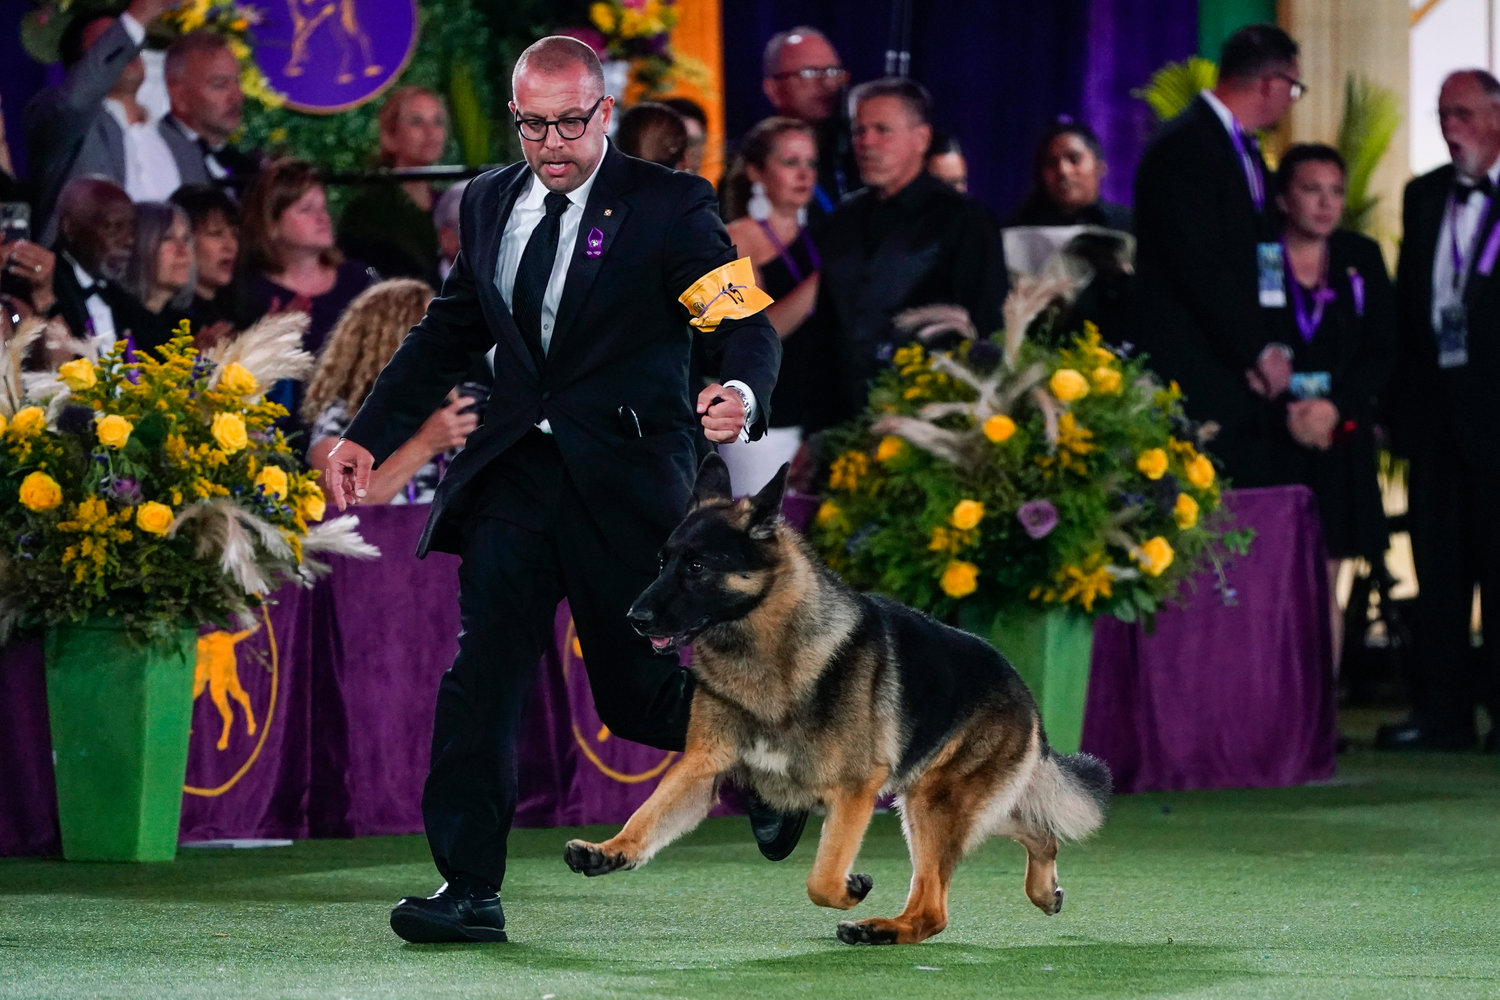 River, a German shepherd, competes for best in show at the 146th Westminster Kennel Club Dog Show, Wednesday, June 22, 2022, in Tarrytown, N.Y. (AP Photo/Frank Franklin II)